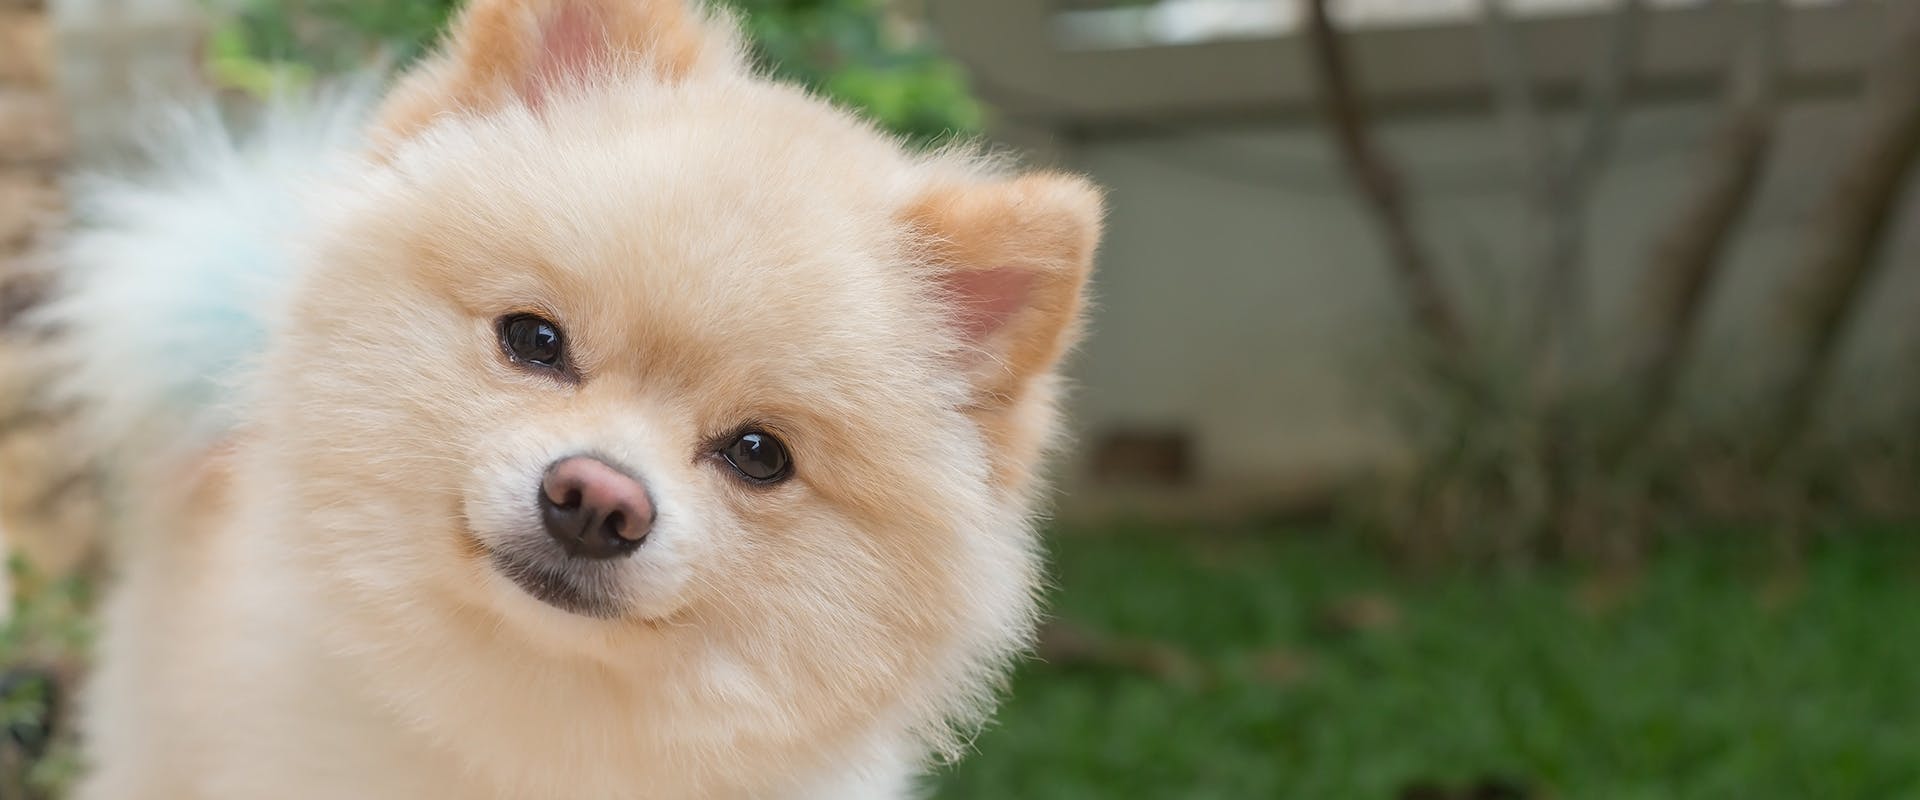 A cute Pomeranian puppy looking inquisitive, its head tilted to one side